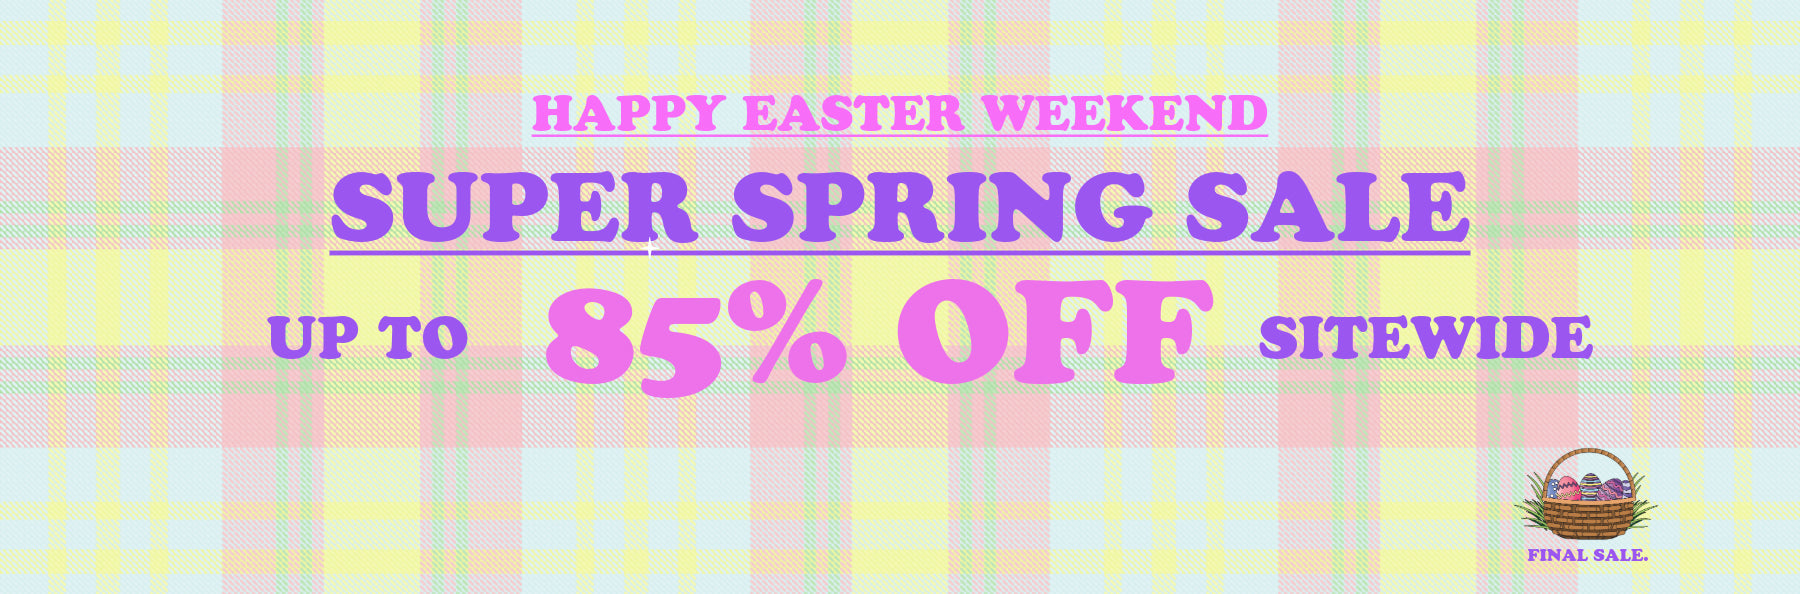 Easter weekend up to 85% off sitewide for mens and womens styles